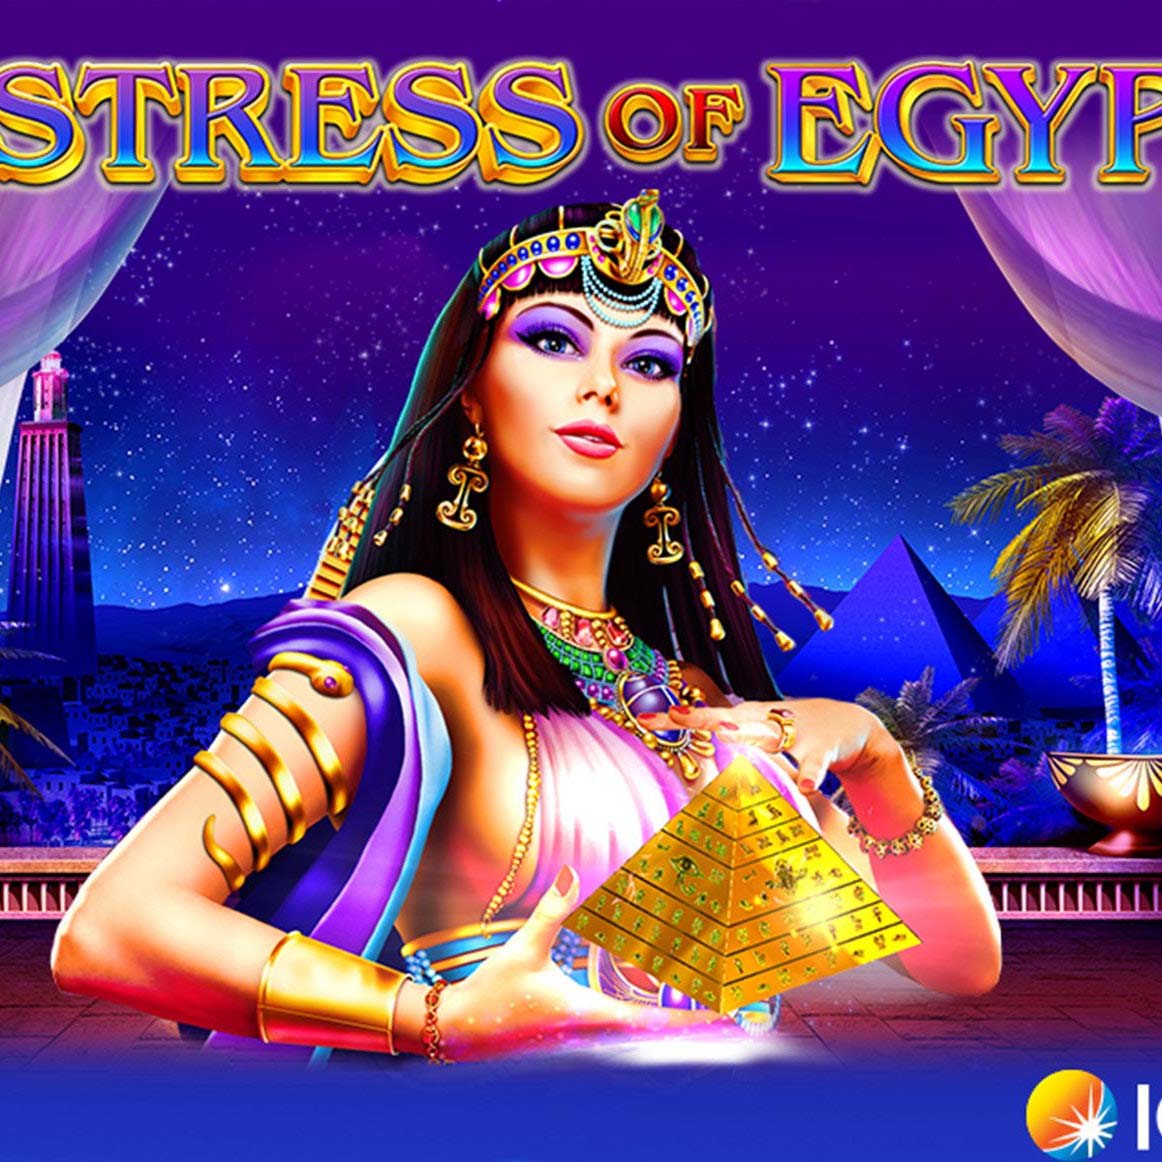 WOW, JUST WOW! Mistress of Egypt Slot - BIG WIN SESSION!